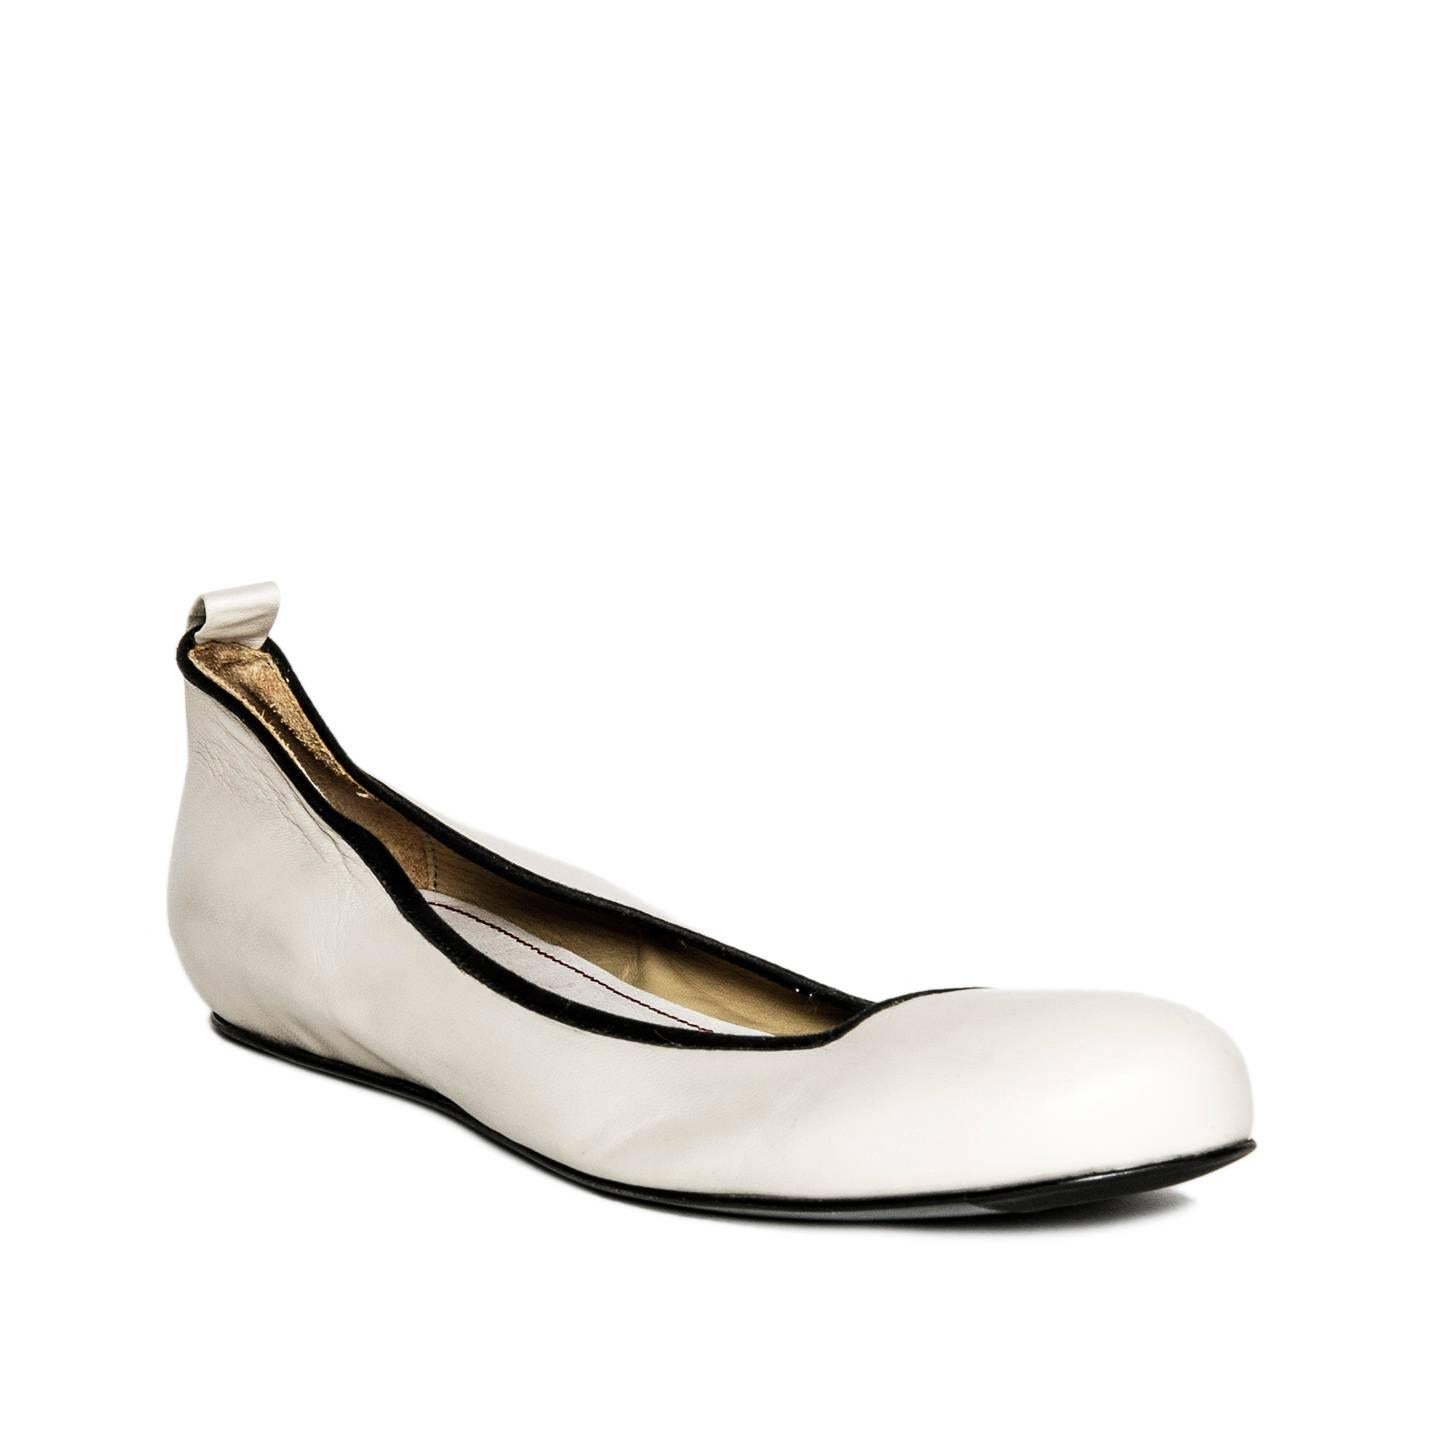 Lanvin 2008. Beige leather ballet flats with black trim and round toe. Made in Italy.

Size  40 Italian sizing

Condition  Excellent: never worn